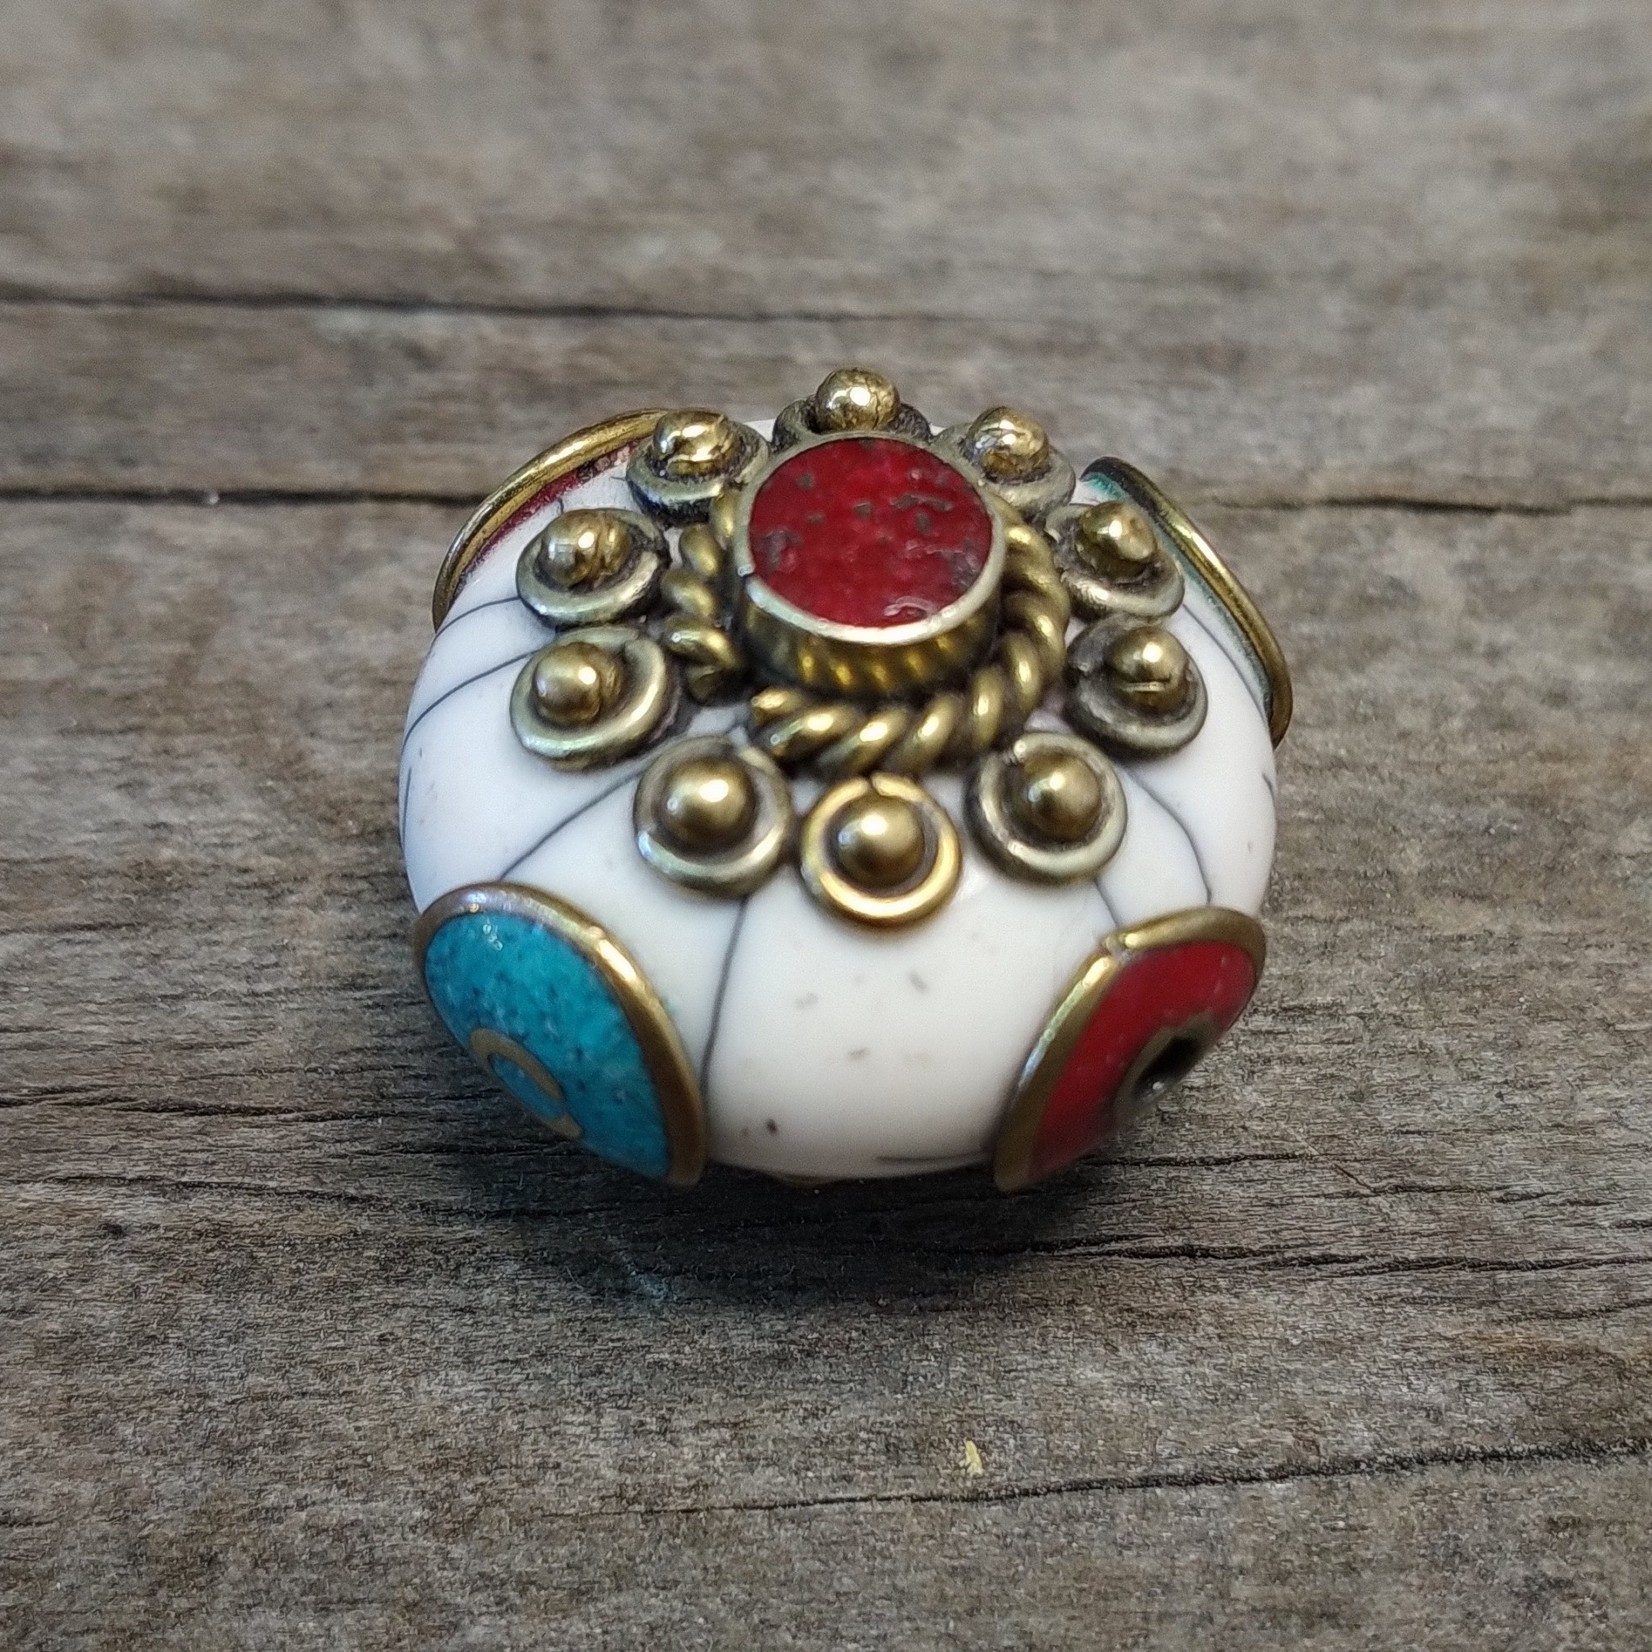 Tibetan Brass Capped 22mm Oval Magnesite Bead with Coral/Turquoise Inlay